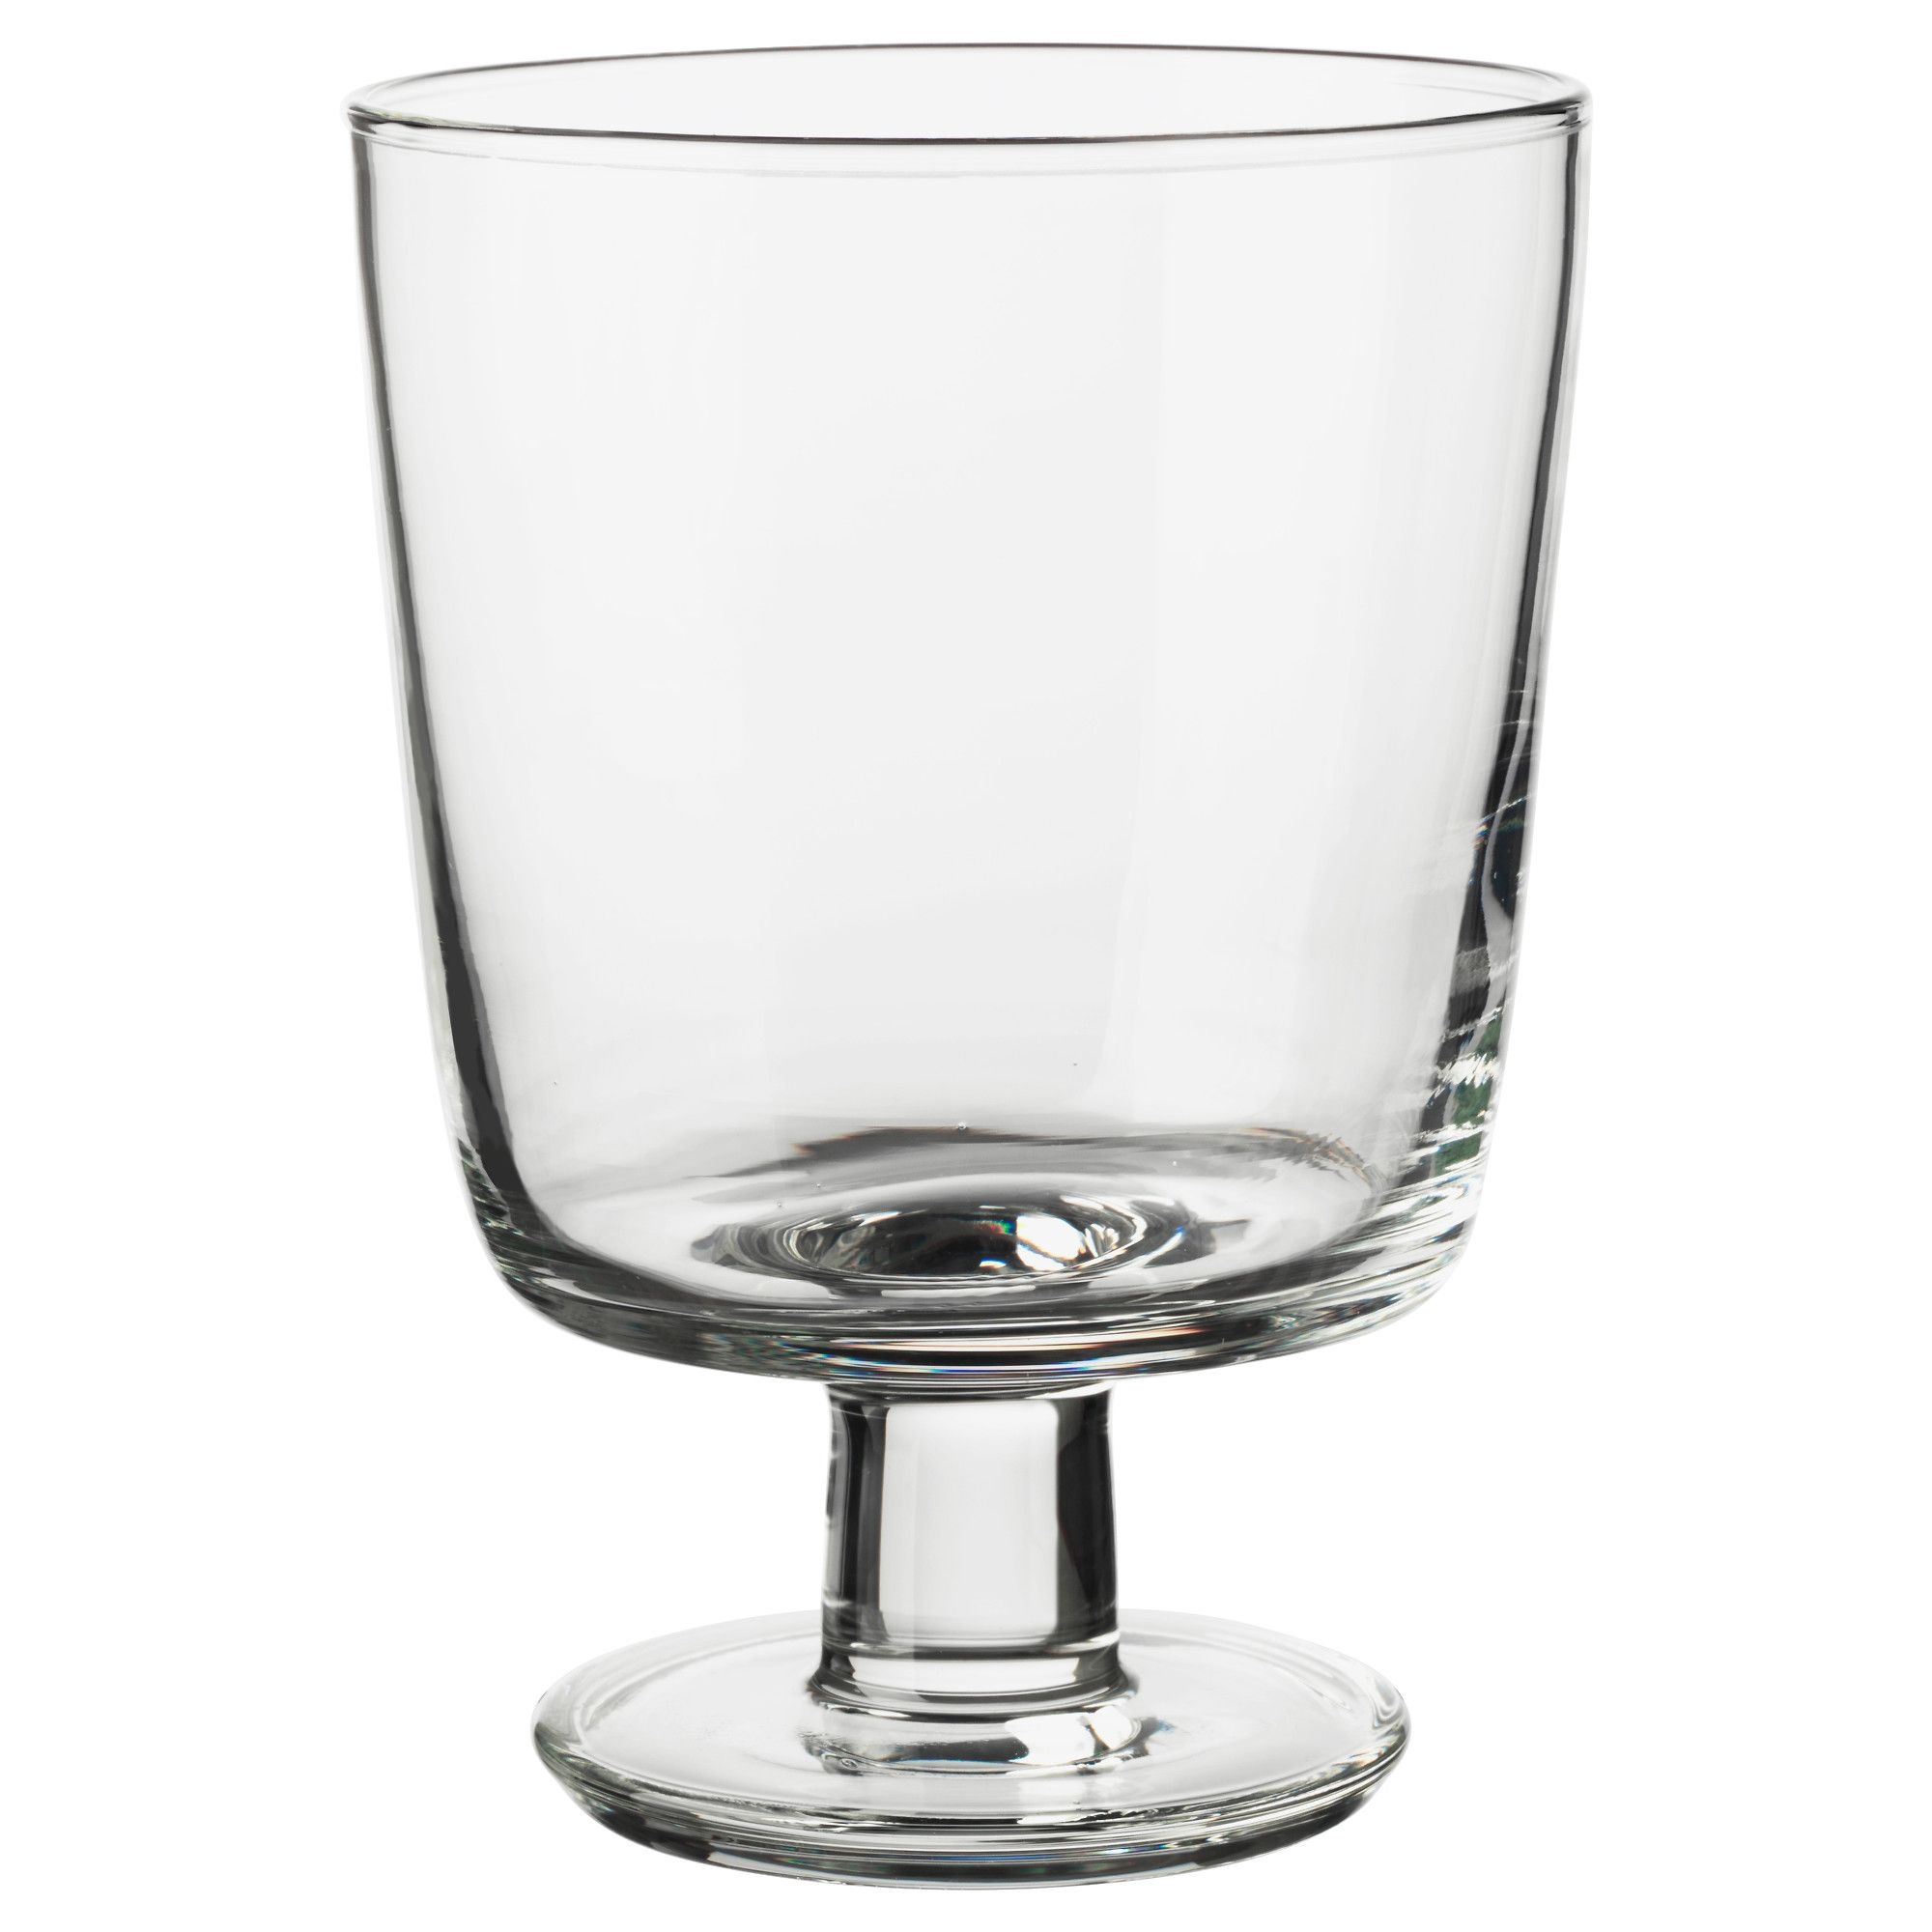 Ikea 365 goblet, Clear glass, High-quality material, 2000x2000 HD Phone